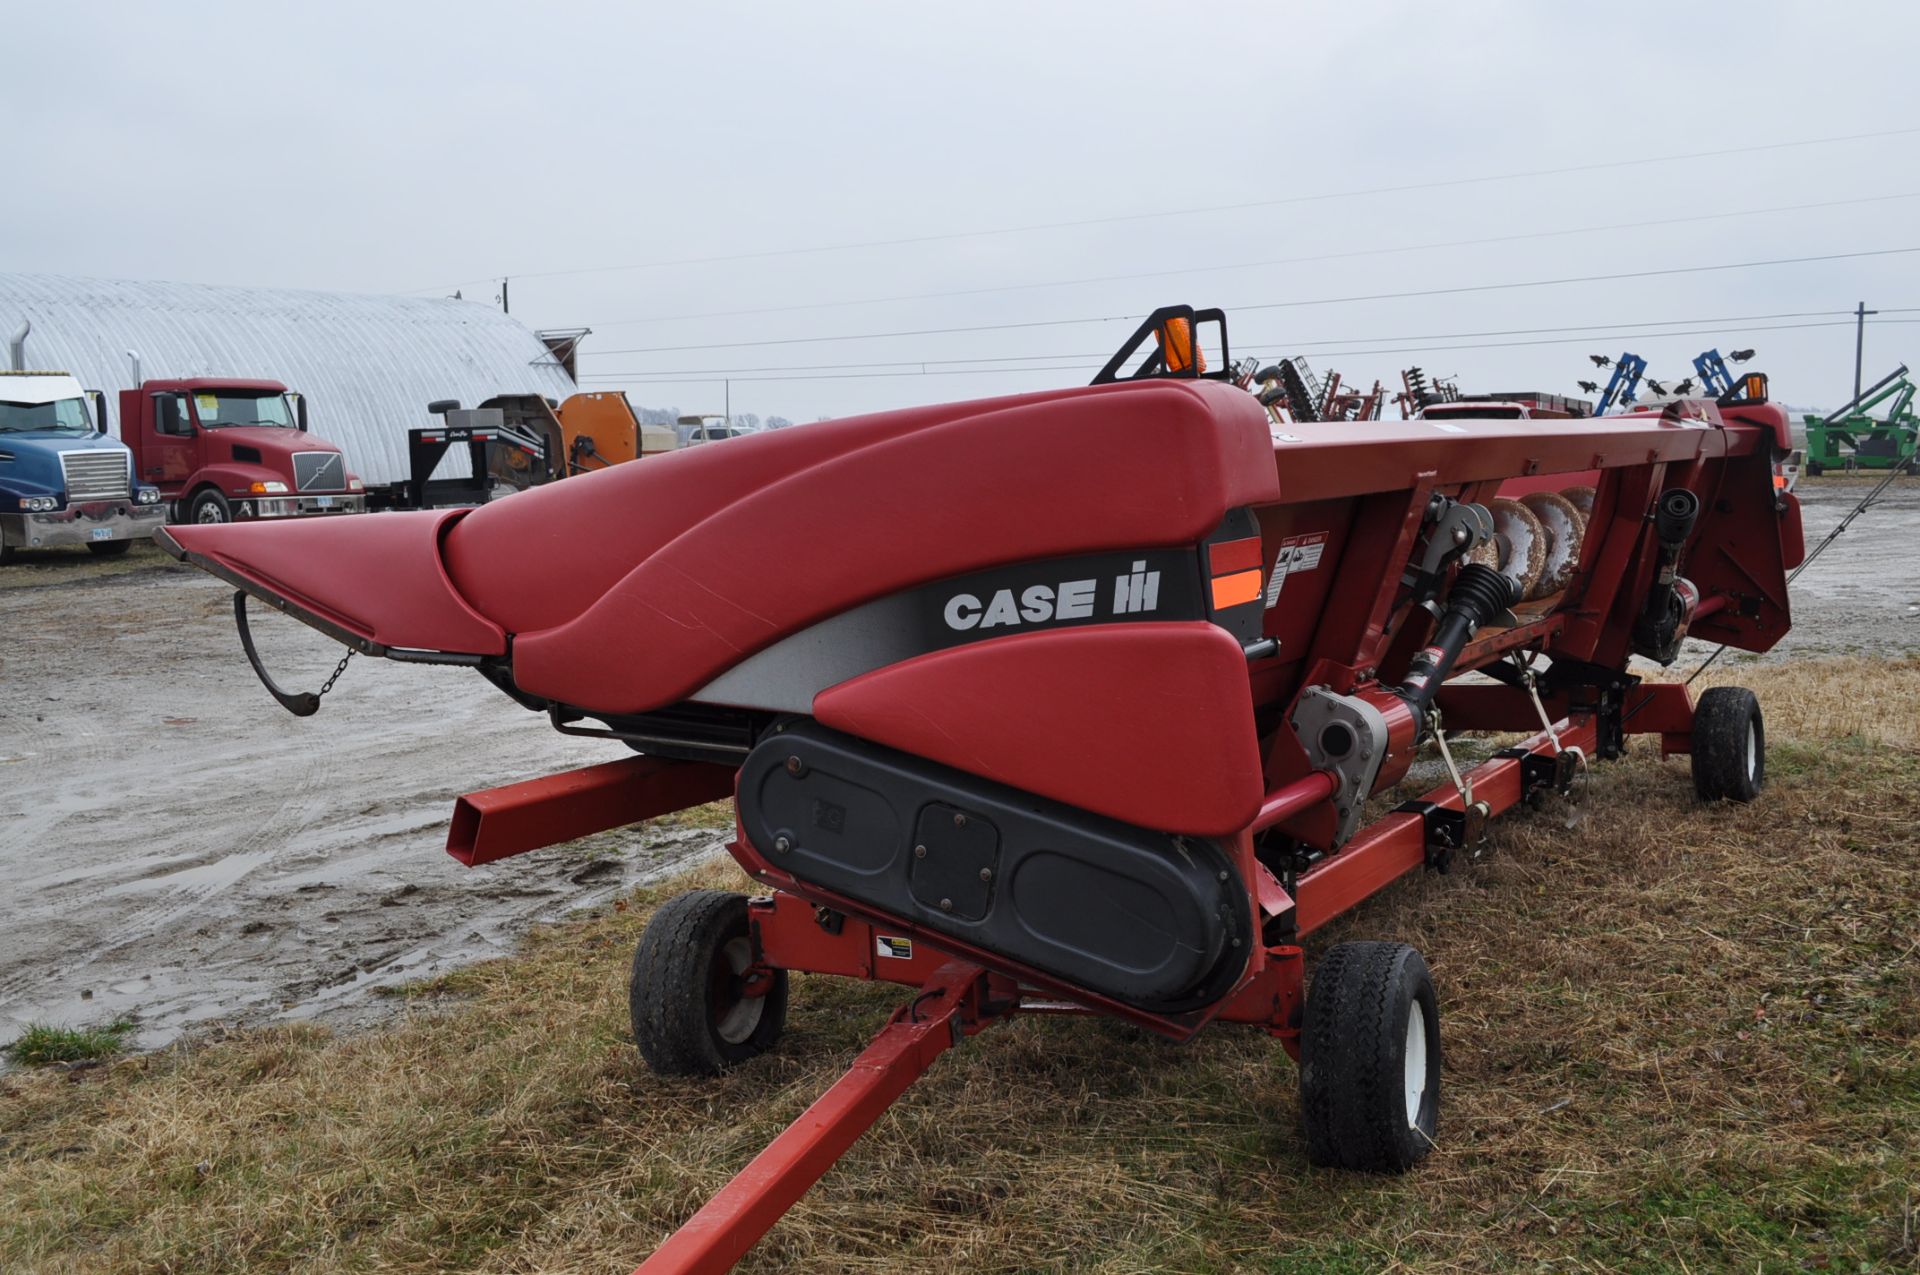 CASE IH 2208 Poly Corn Head, 8 rows x 30”, hyd deck plates, knife rolls, poly, 3 header height - Image 3 of 16